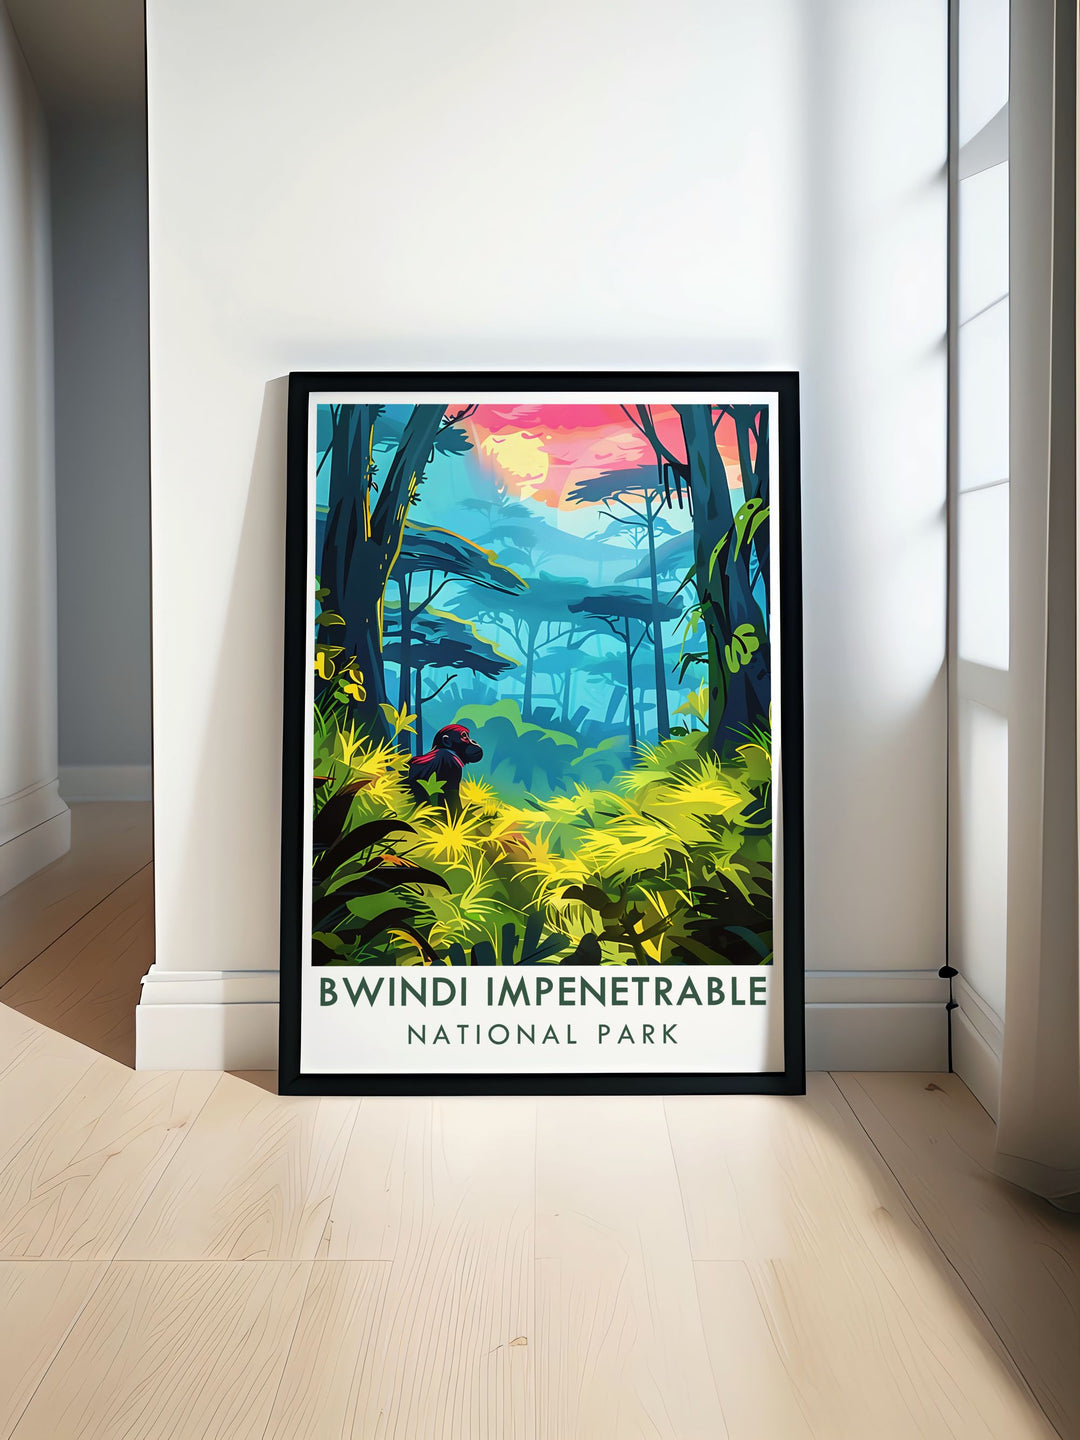 The majestic mountain gorillas and the rich biodiversity of Bwindi are highlighted in this art print, offering a perfect blend of natural beauty and wildlife charm for your home.